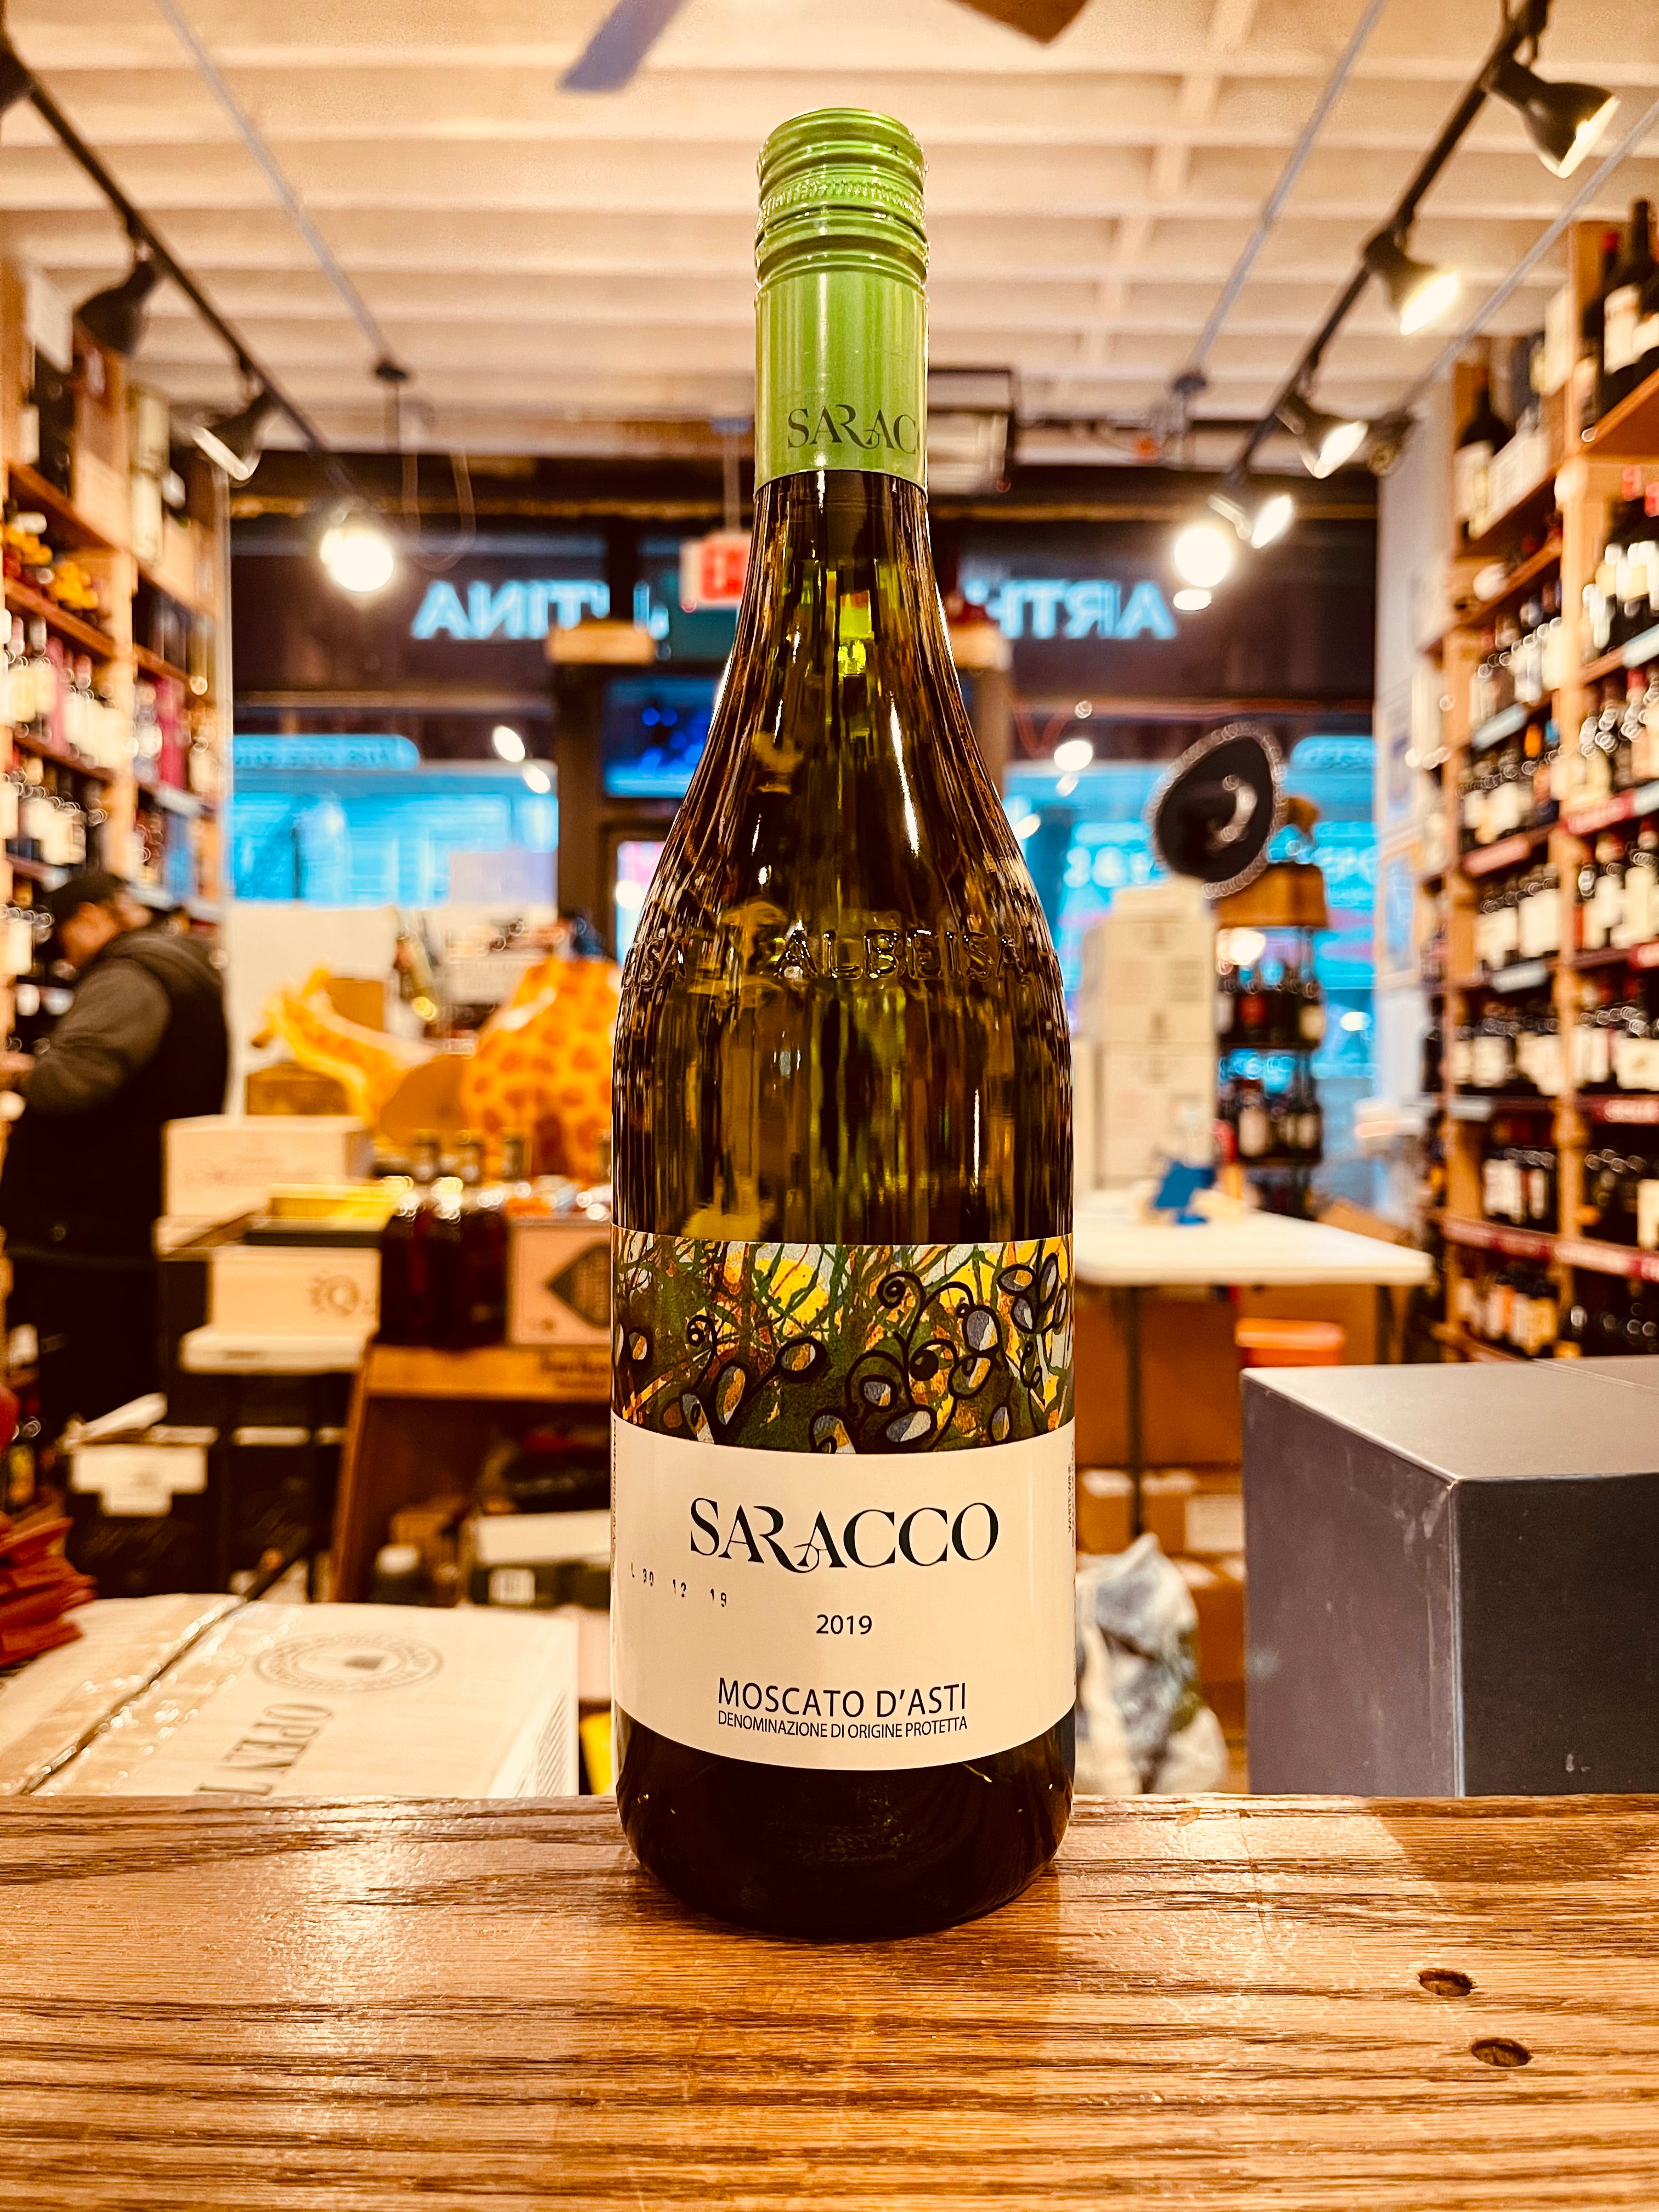 Saracco Moscato D'Asti 750ml a straw colored glass wine bottle with a white and green label and green top